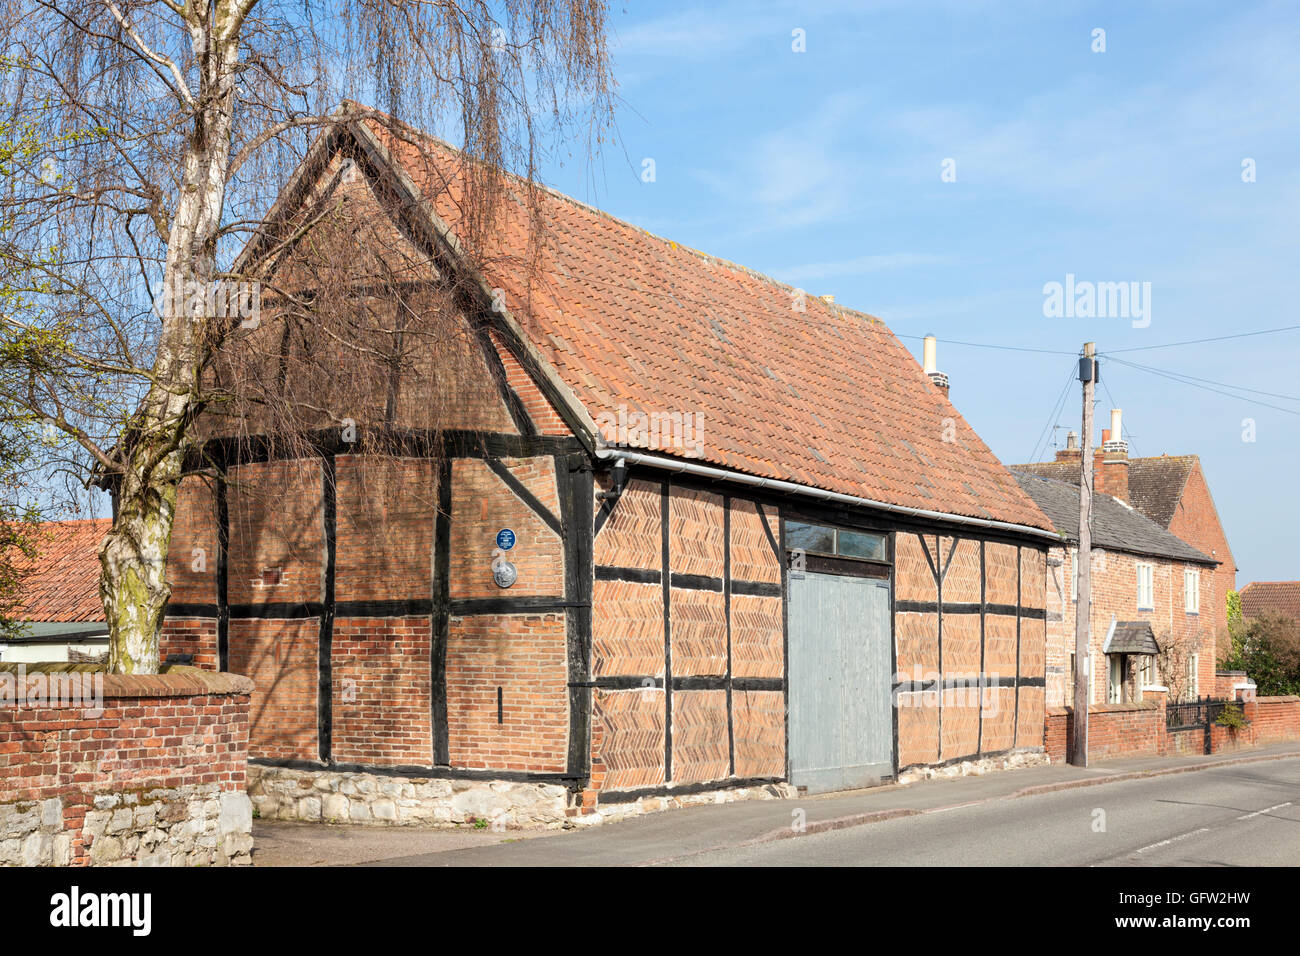 Timber framed brick barn in the village of Hoton, Leicestershire, England, UK Stock Photo